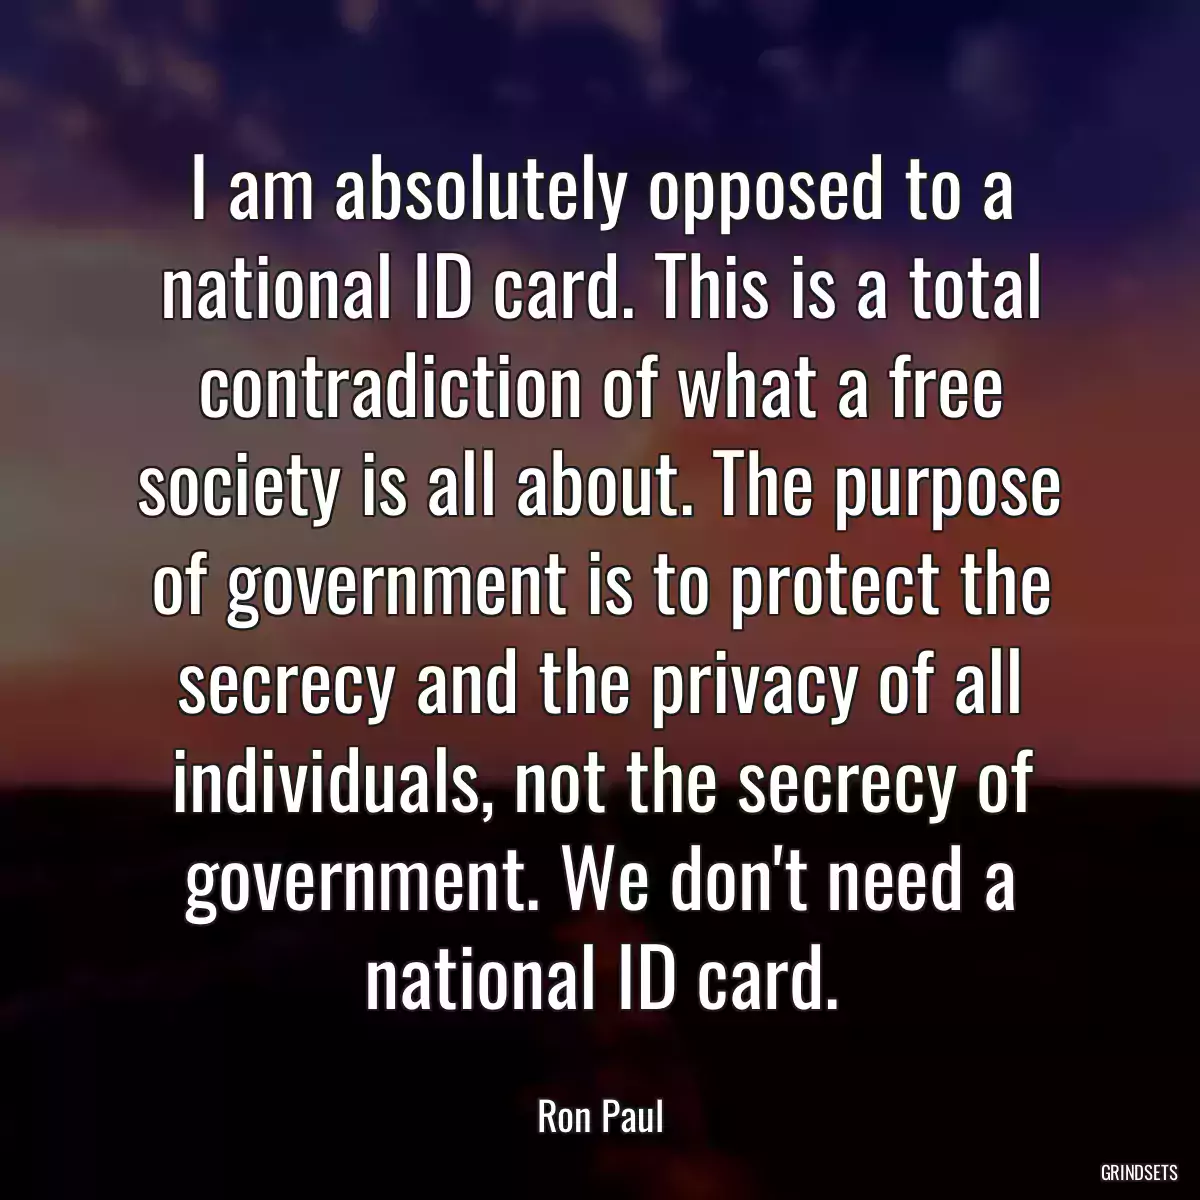 I am absolutely opposed to a national ID card. This is a total contradiction of what a free society is all about. The purpose of government is to protect the secrecy and the privacy of all individuals, not the secrecy of government. We don\'t need a national ID card.